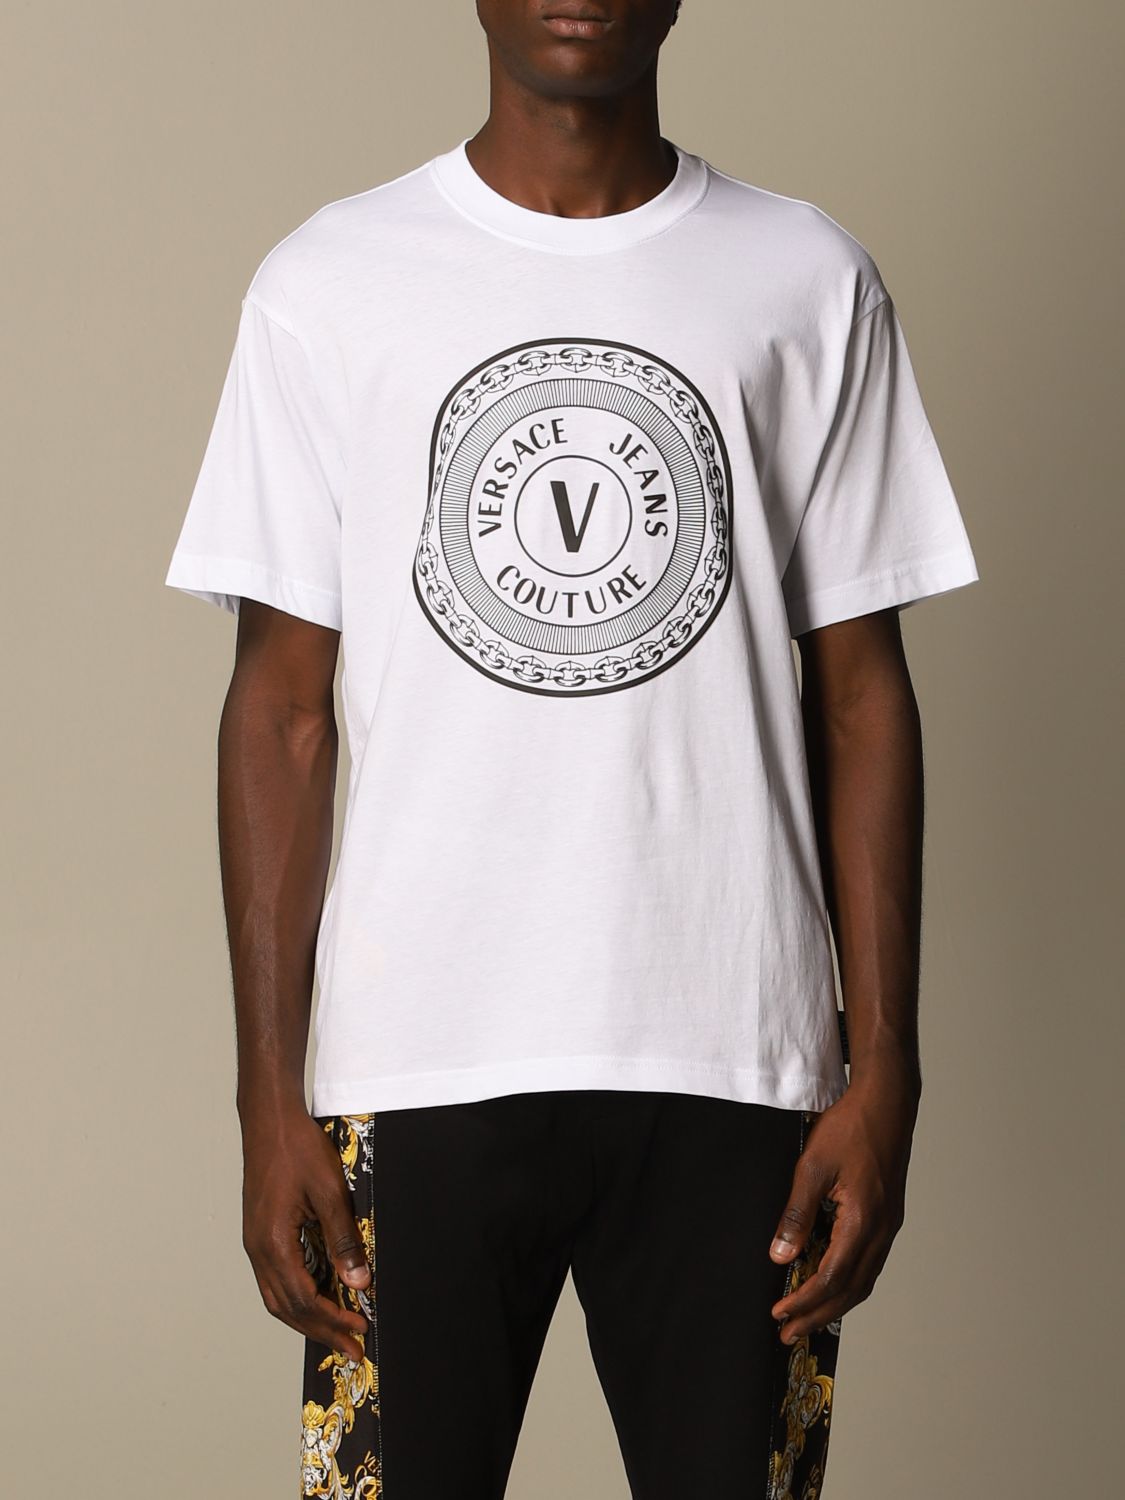 VERSACE JEANS COUTURE: logo T-shirt - White | Versace Jeans Couture t ...